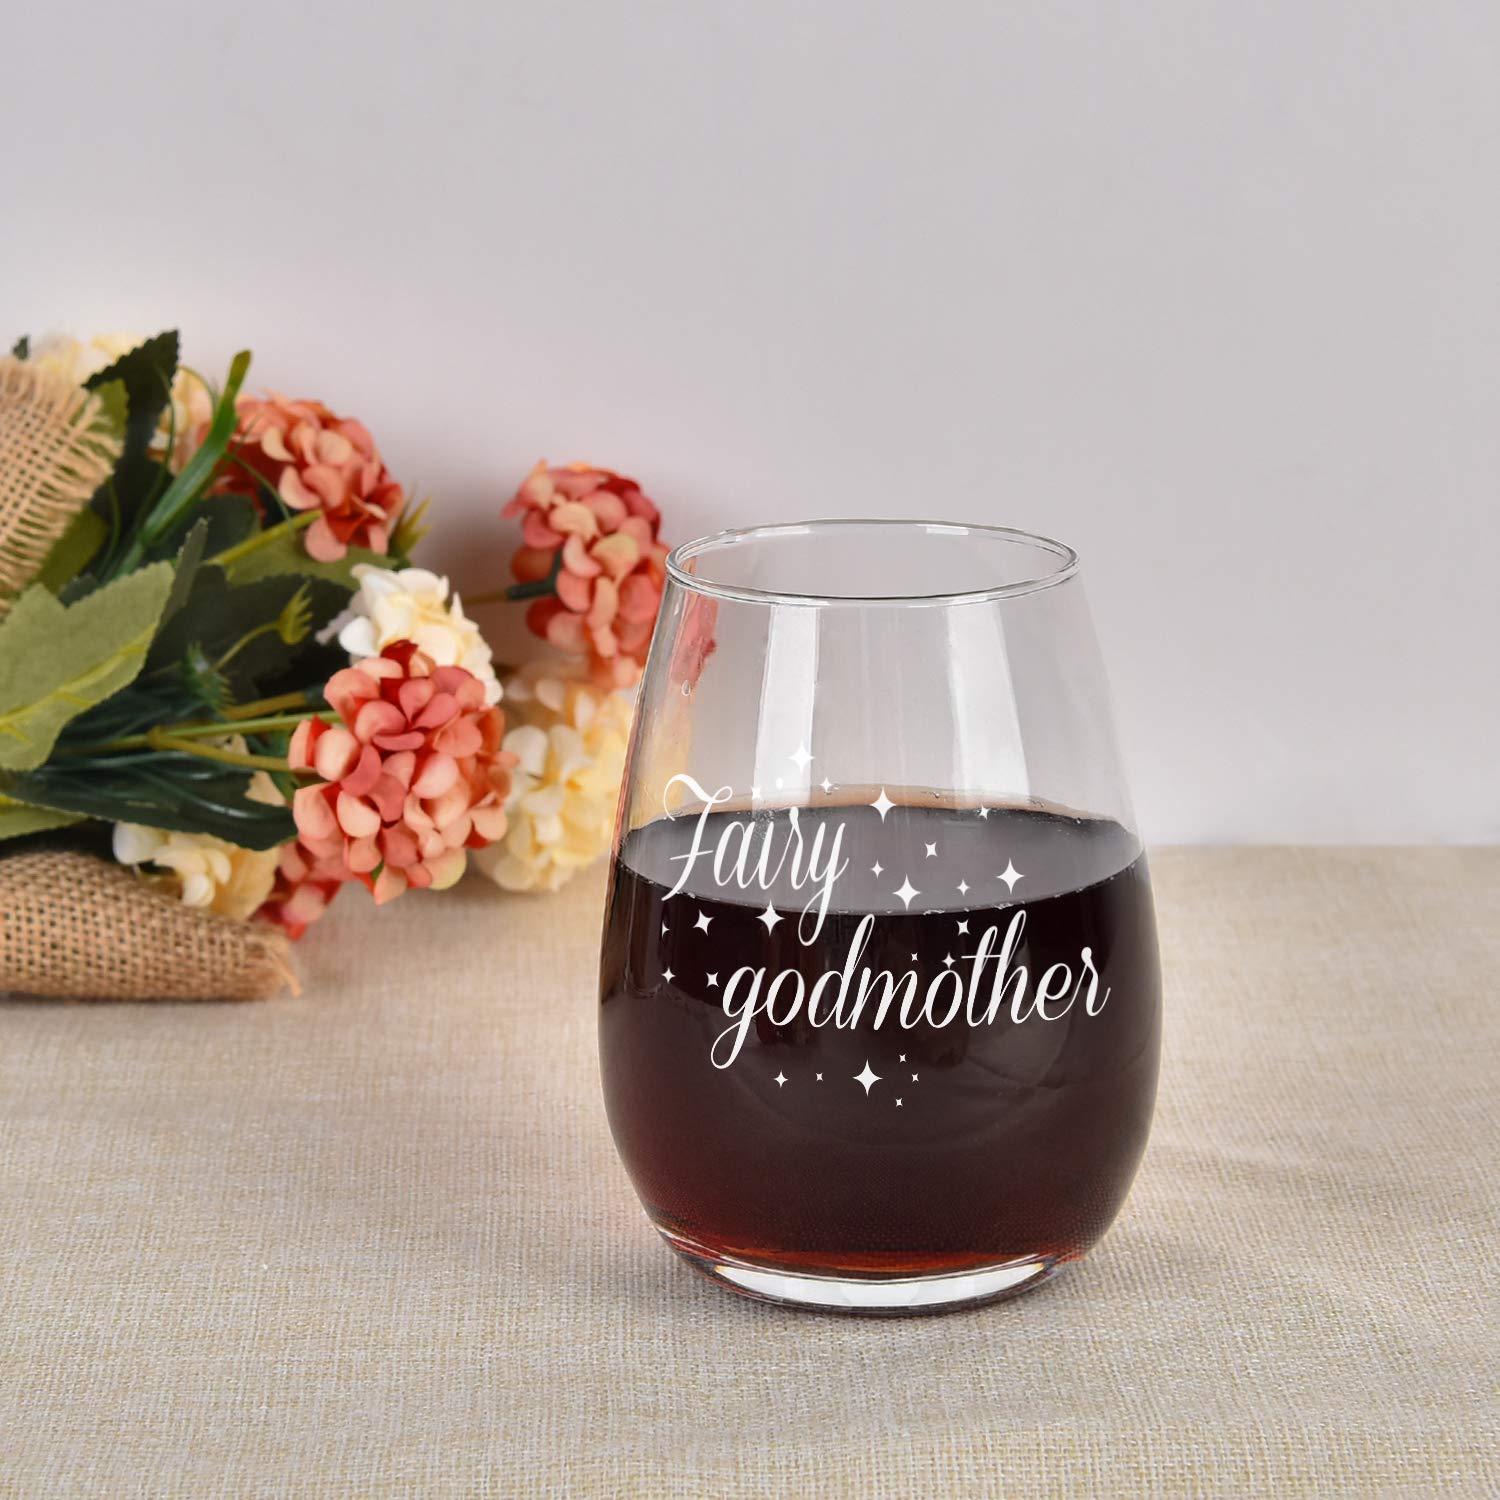 Fairy Godmother Stemless Wine Glass, Godmother Wine Glass from Godchildren, Mother’s Day Wine Glass for Women, Wife, Mom, New Mom, Mom to be